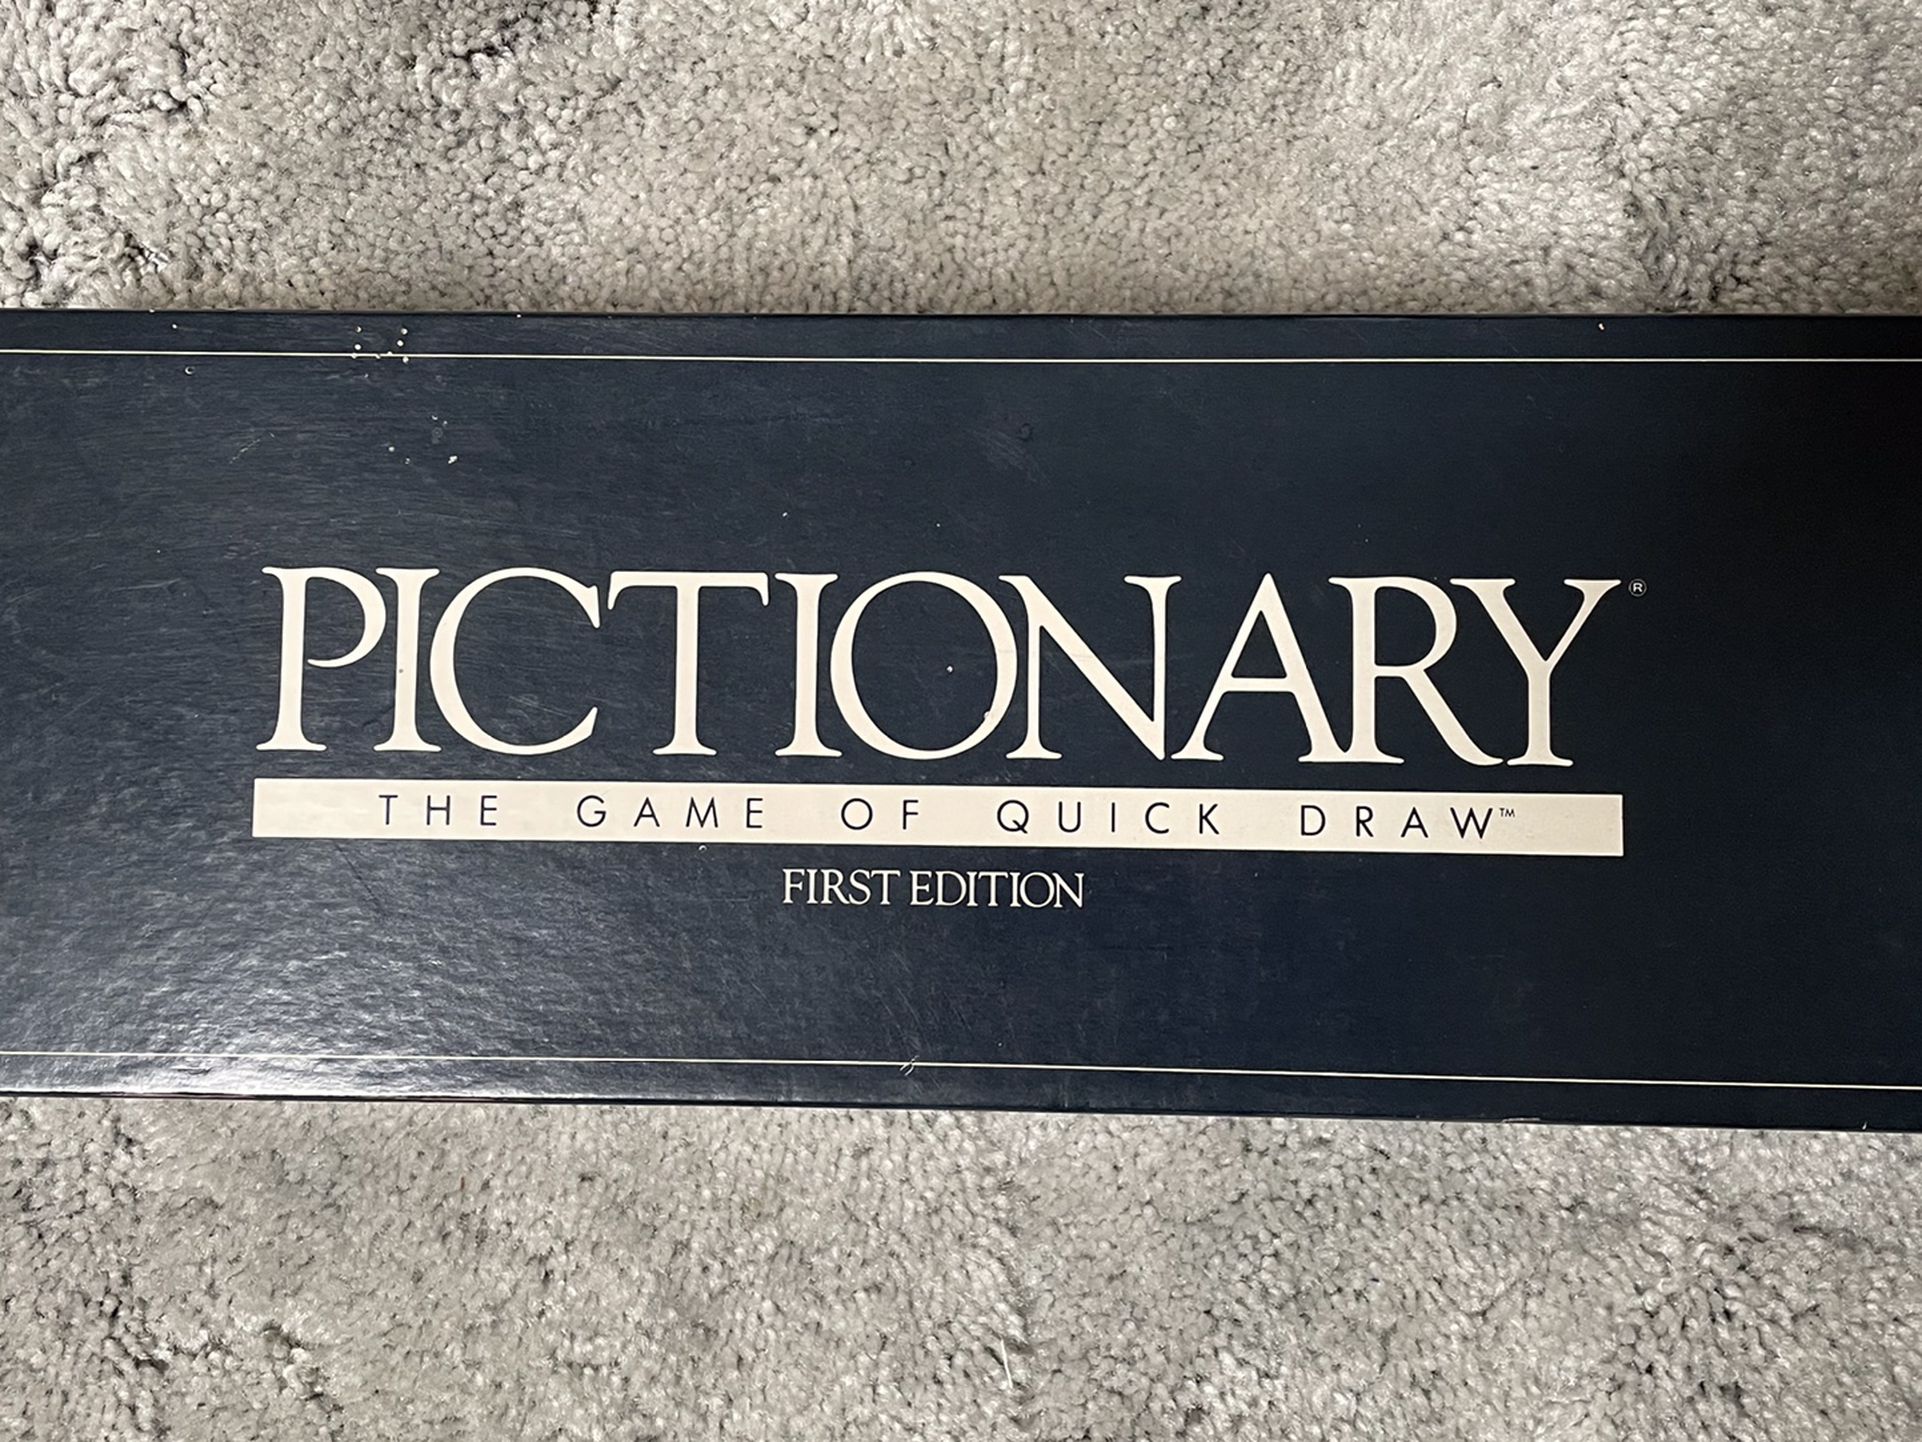 Pictionary First edition 1985. All pieces included   Smoke free home. 